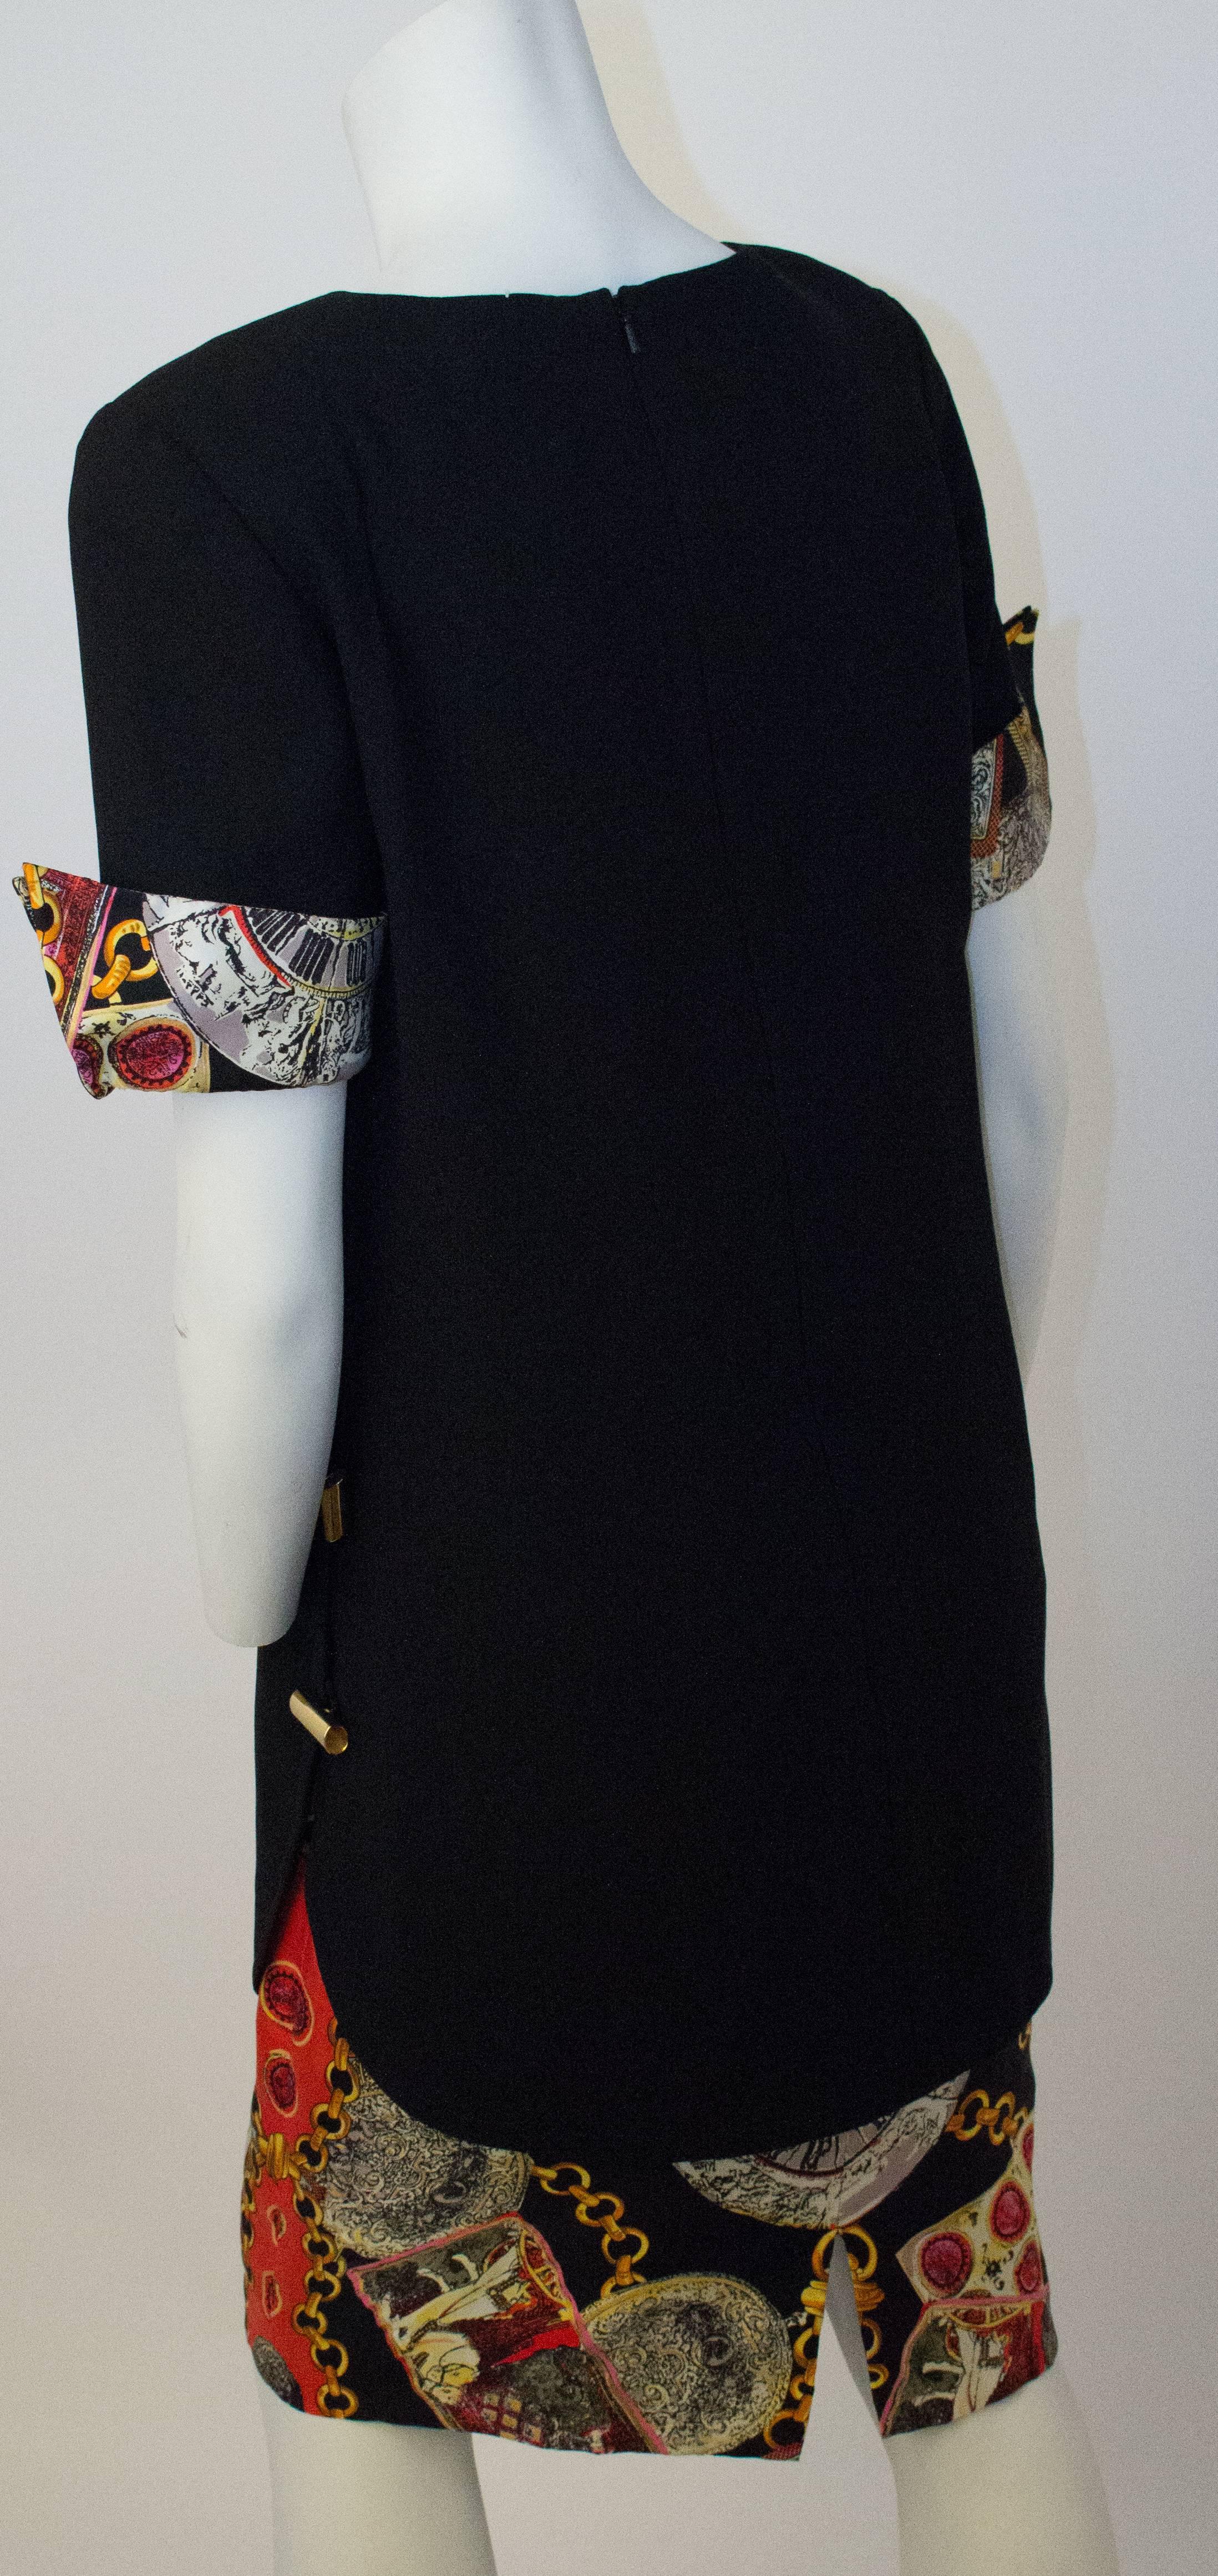 80s Bill Blass Shift Dress. Gold tone buttons along the side. Fully lined. Zips up the back. 